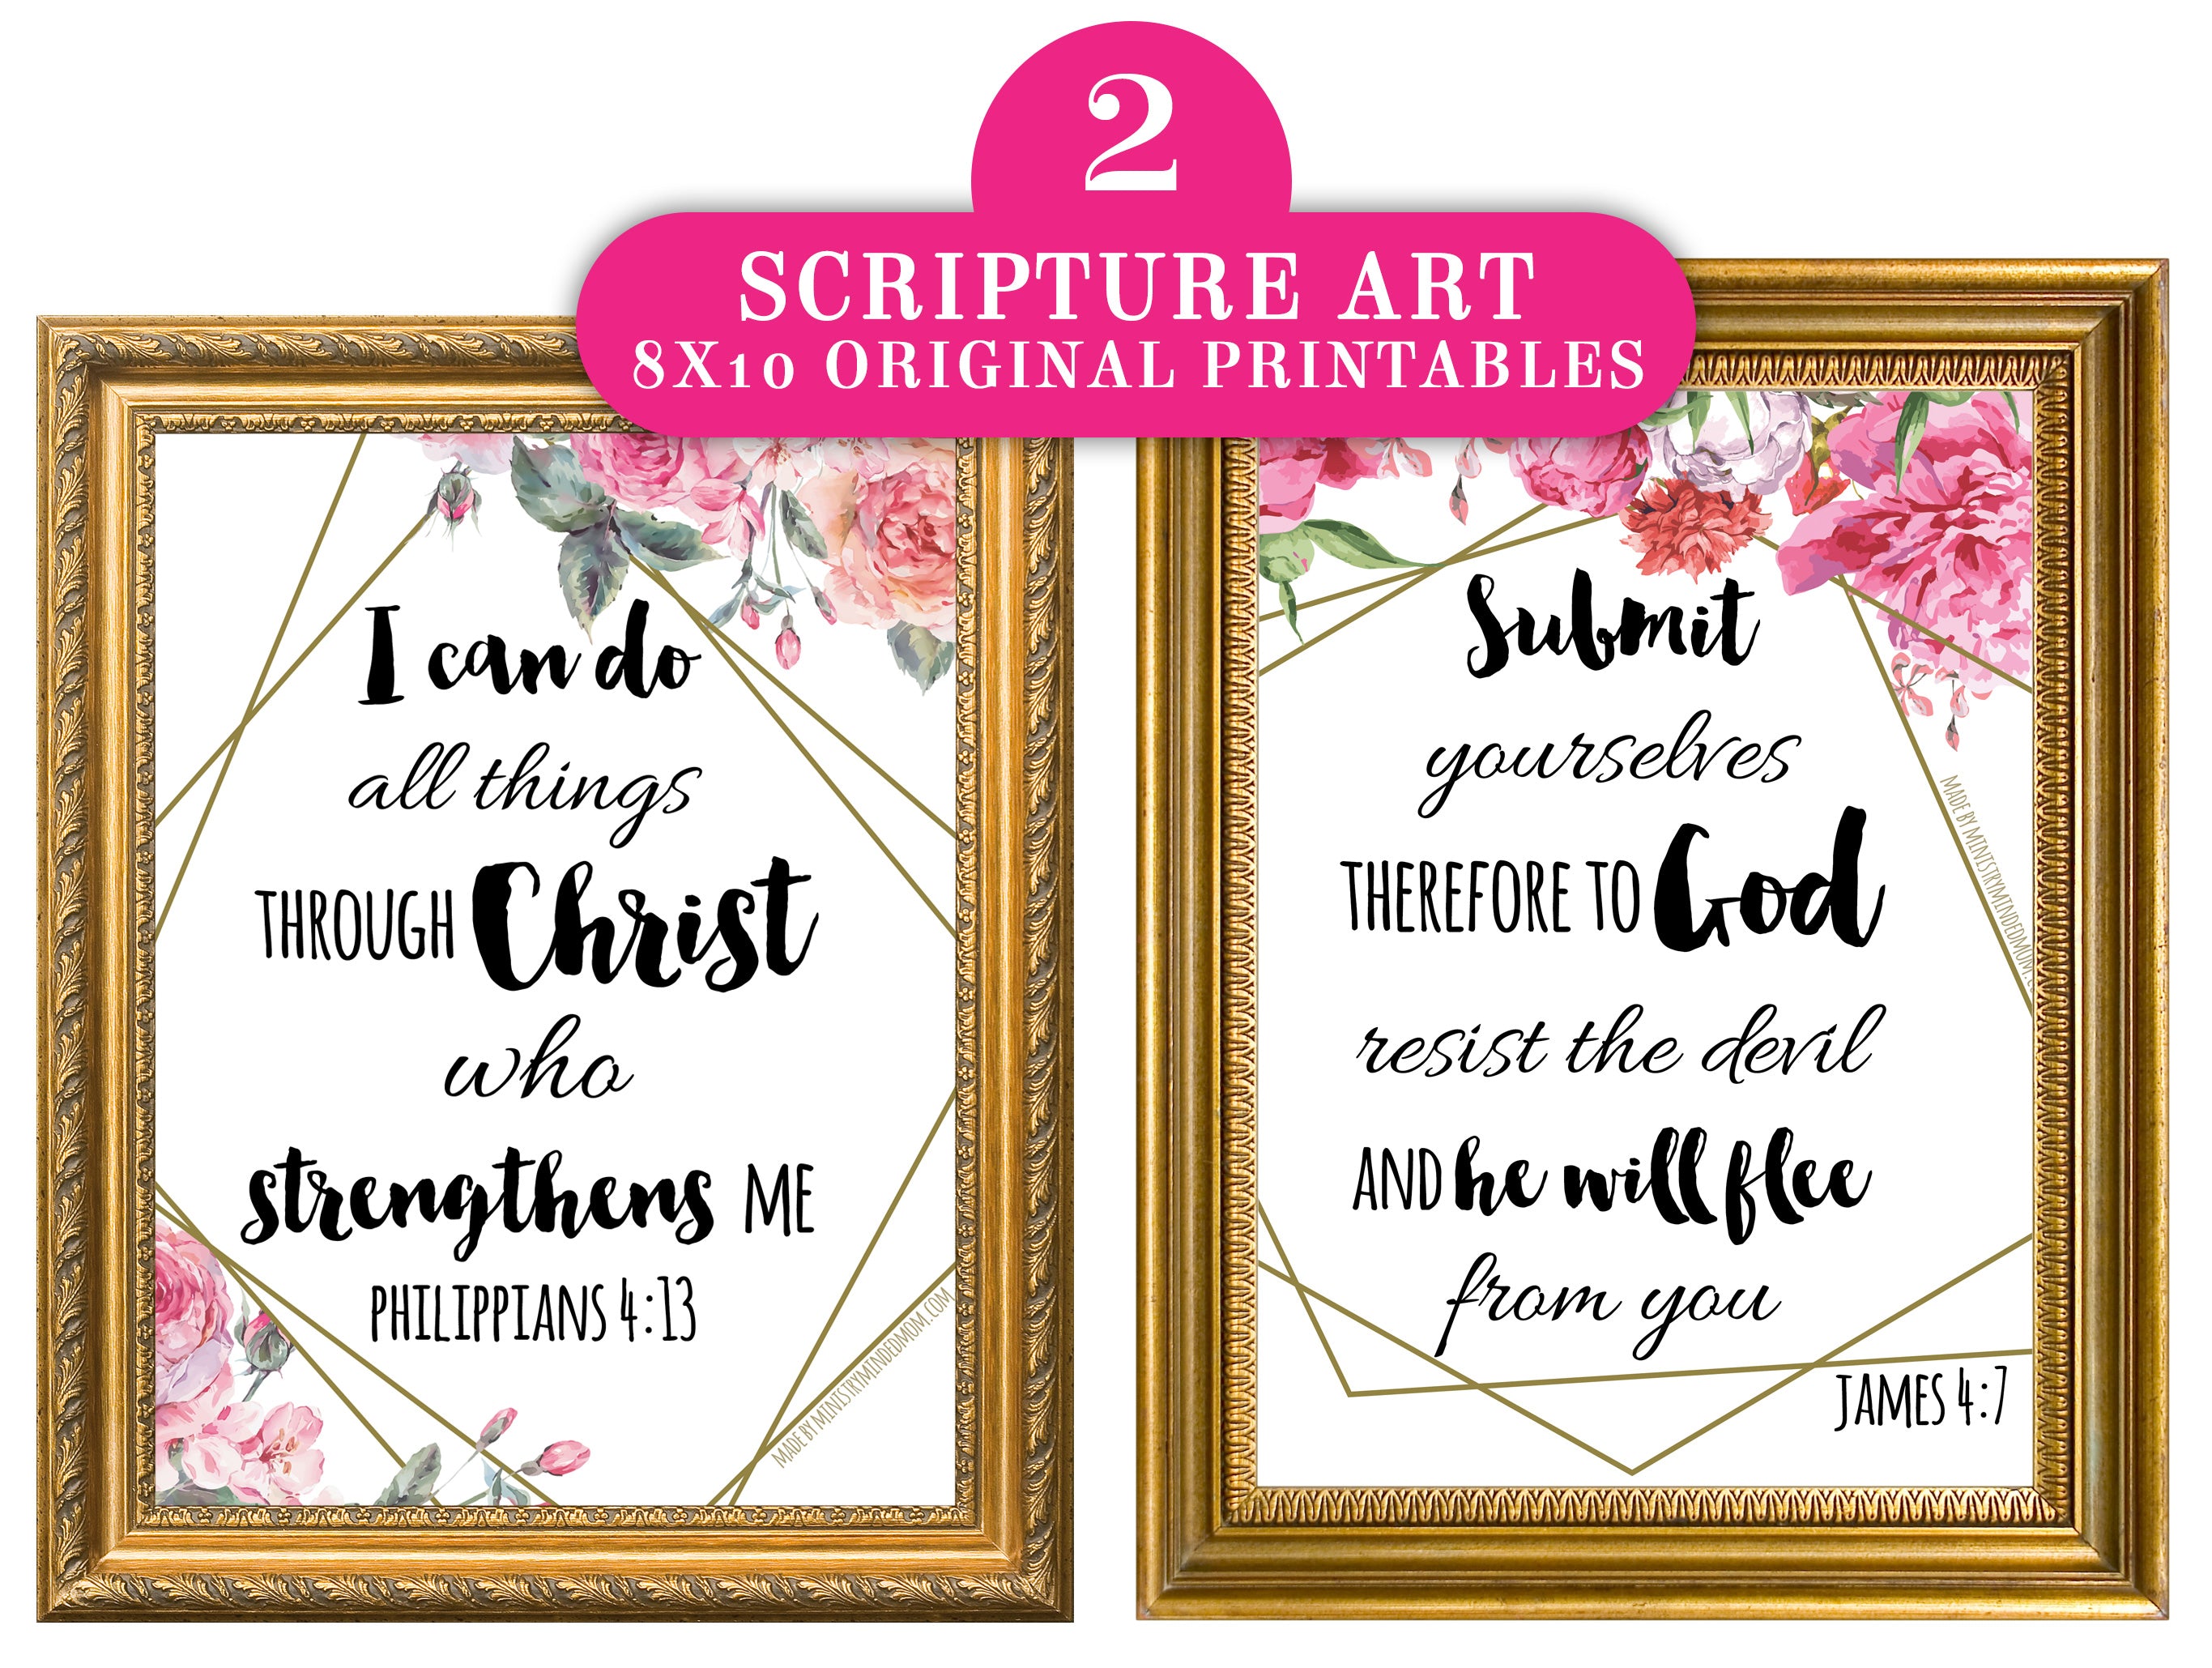 Spiritual Spring Cleaning Bible Study Bundle {112+ pages + 9 items}